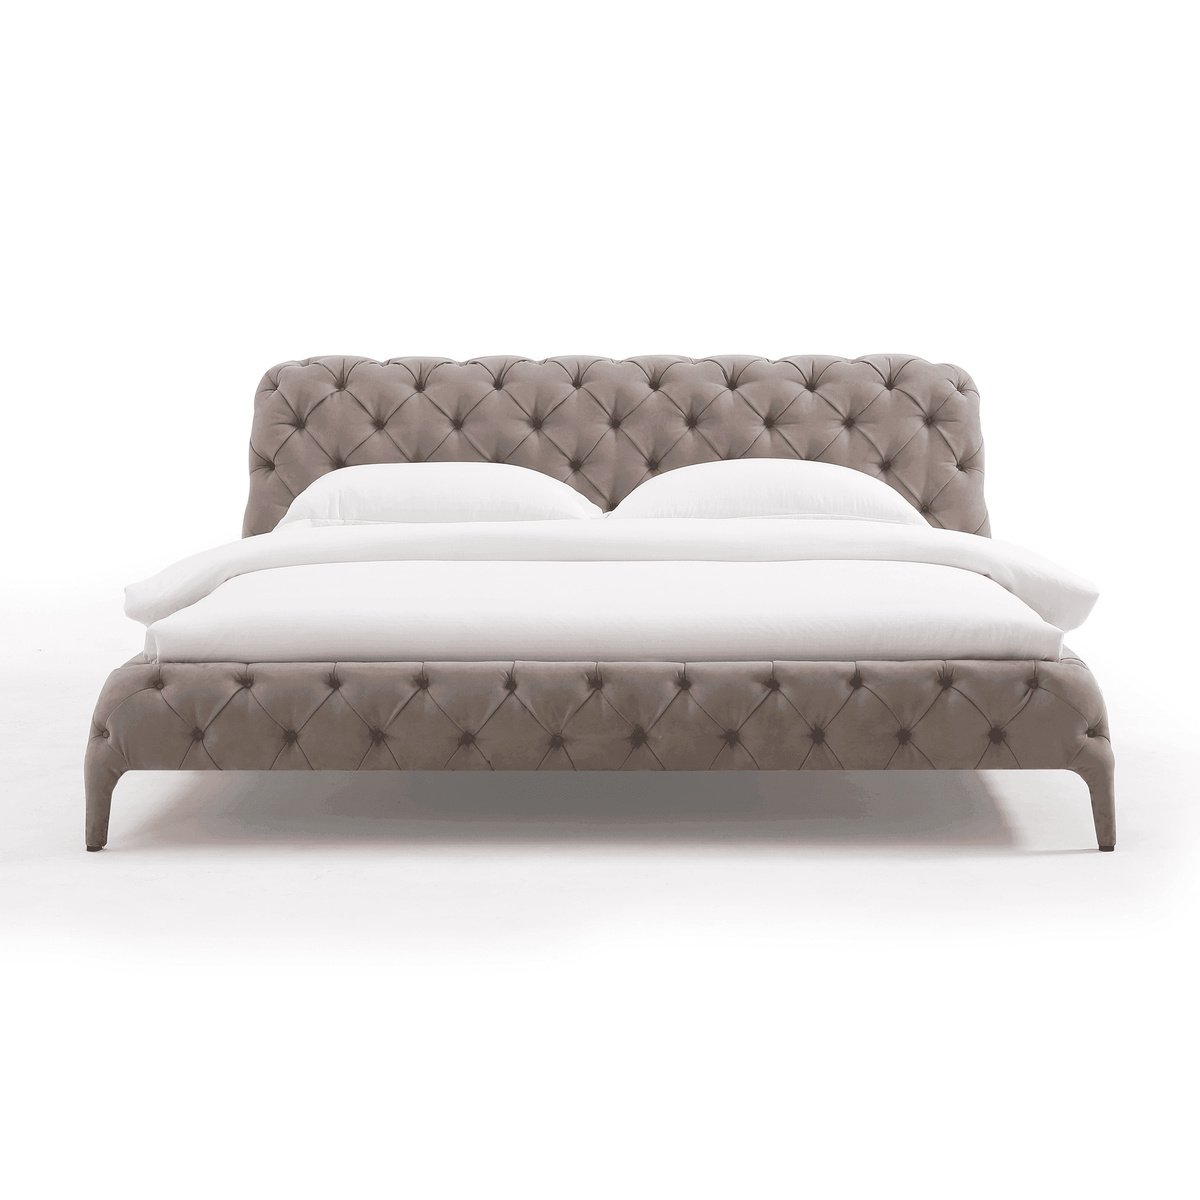 Mirage Faux Leather Bed Frame by Chattel Singapore